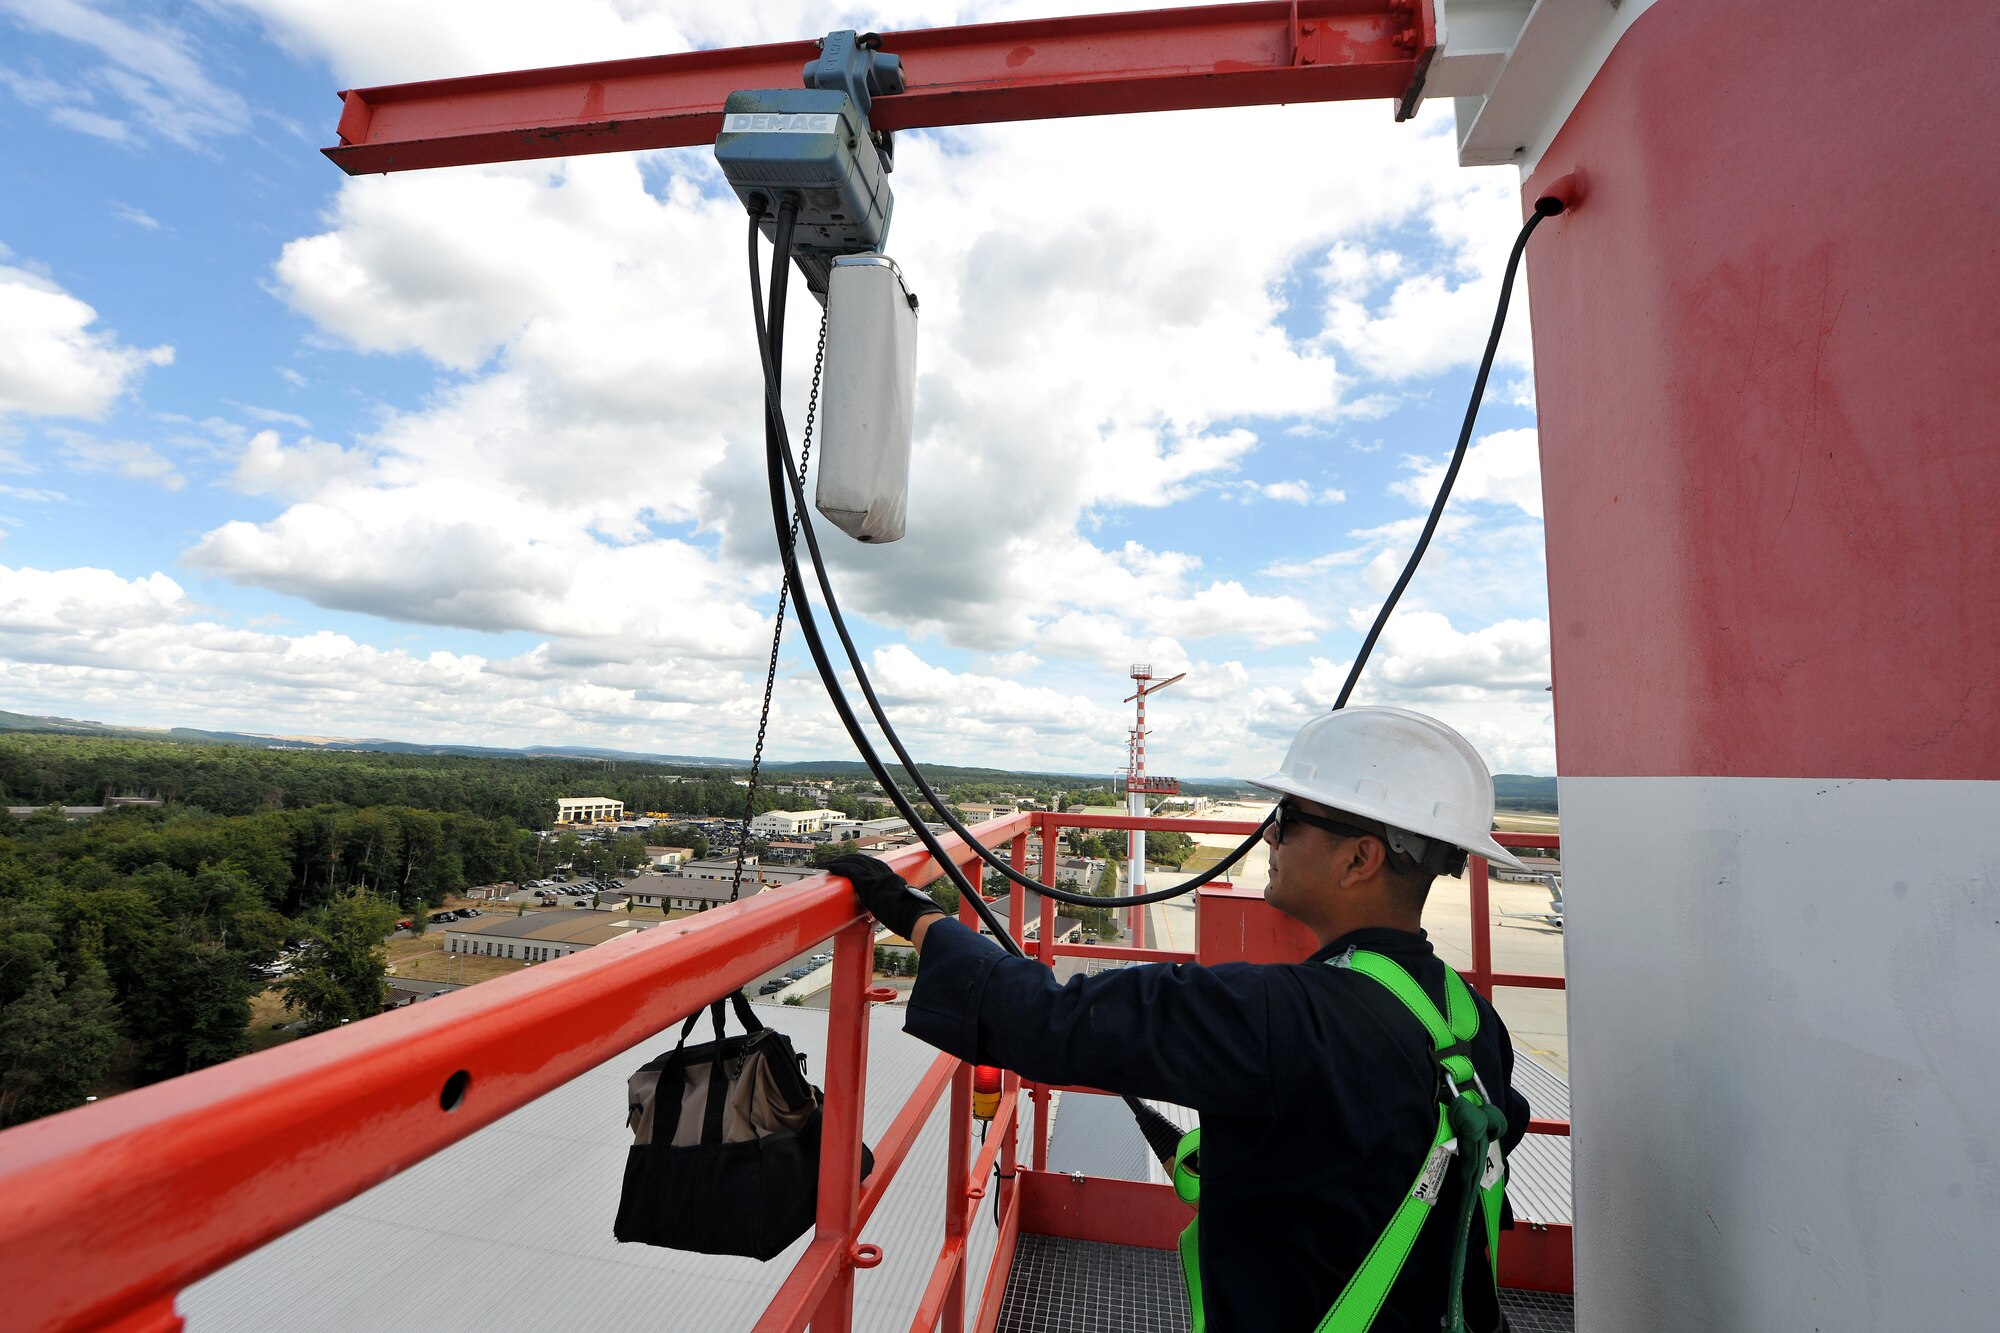 Airman 1st Class Kyle Rivera, 786th Civil Engineer Squadron electrical systems section technician, uses a crane to pull-up extra equipment to the ramp light platform, Aug. 19, 2013, Ramstein Air Base, Germany.  The ramp lights consist of 25, 2000-watt light bulbs and are maintained every quarter to ensure all bulbs are in working condition.  (U.S. Air Force photo/Senior Airman Chris Willis)